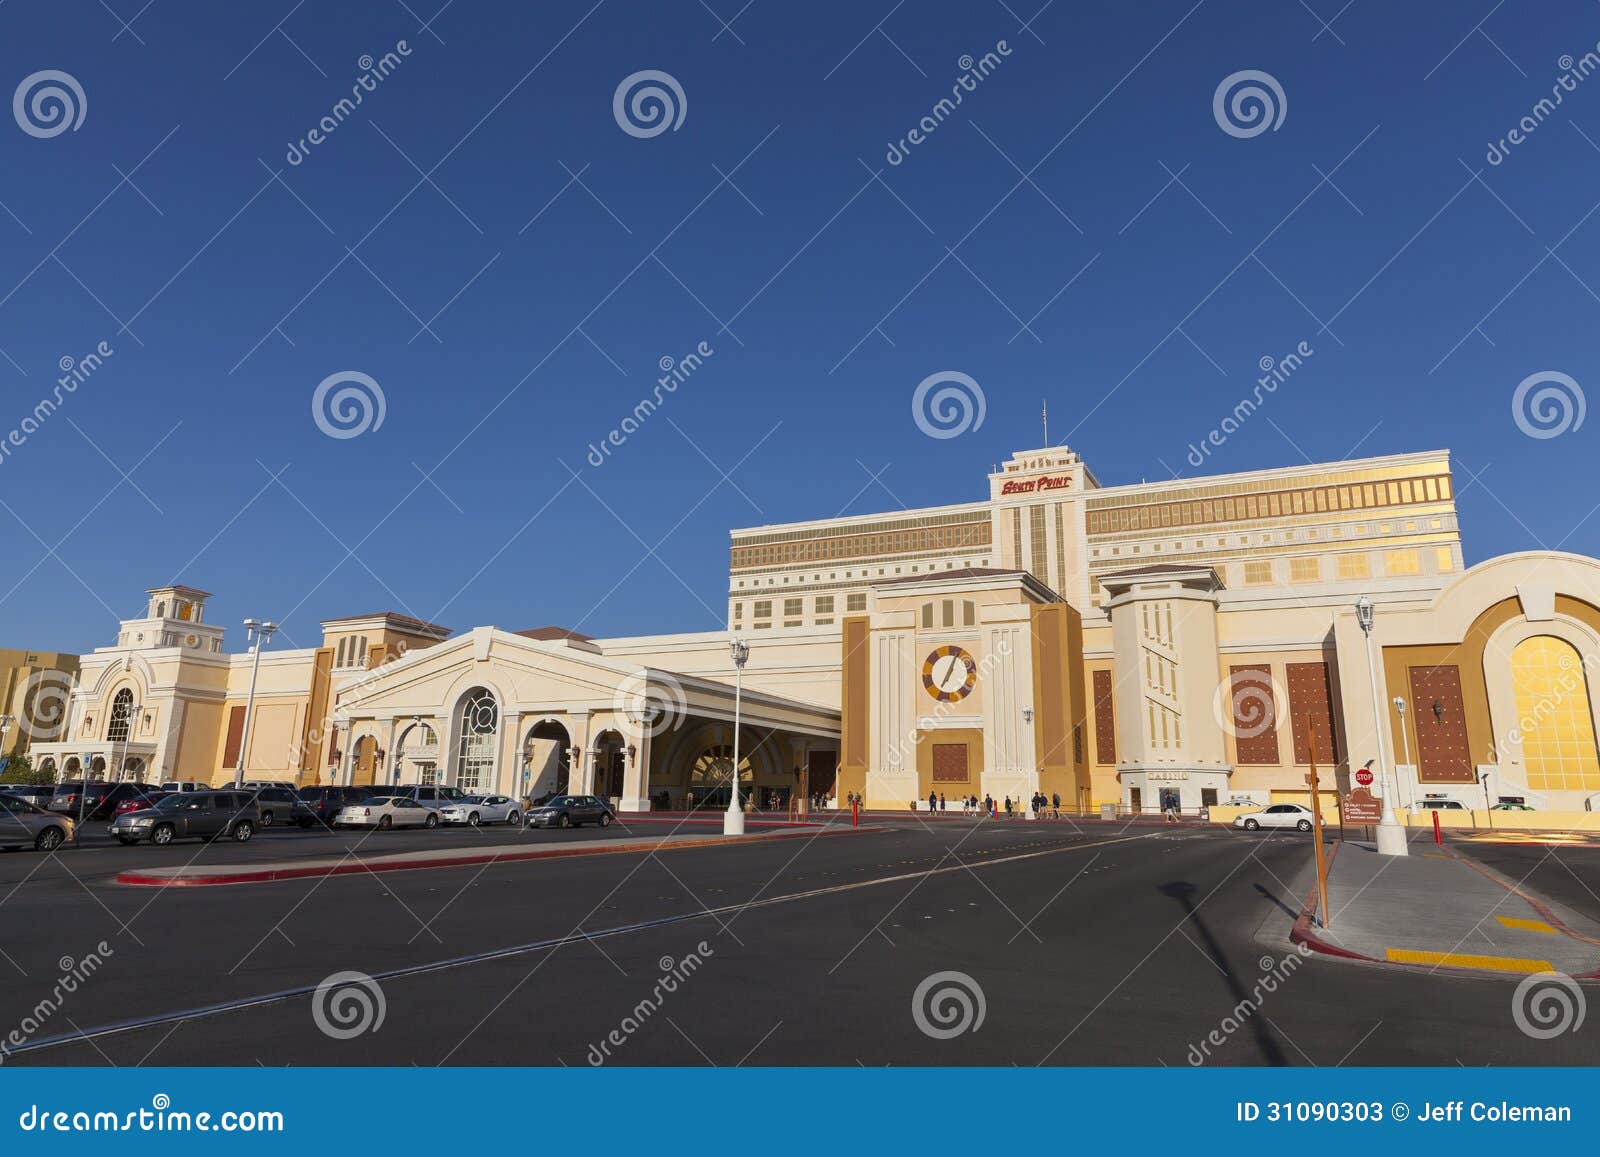 South Point Hotel in Las Vegas, NV on May 18, 2013 Editorial Stock Photo -  Image of tourism, sunny: 31090303